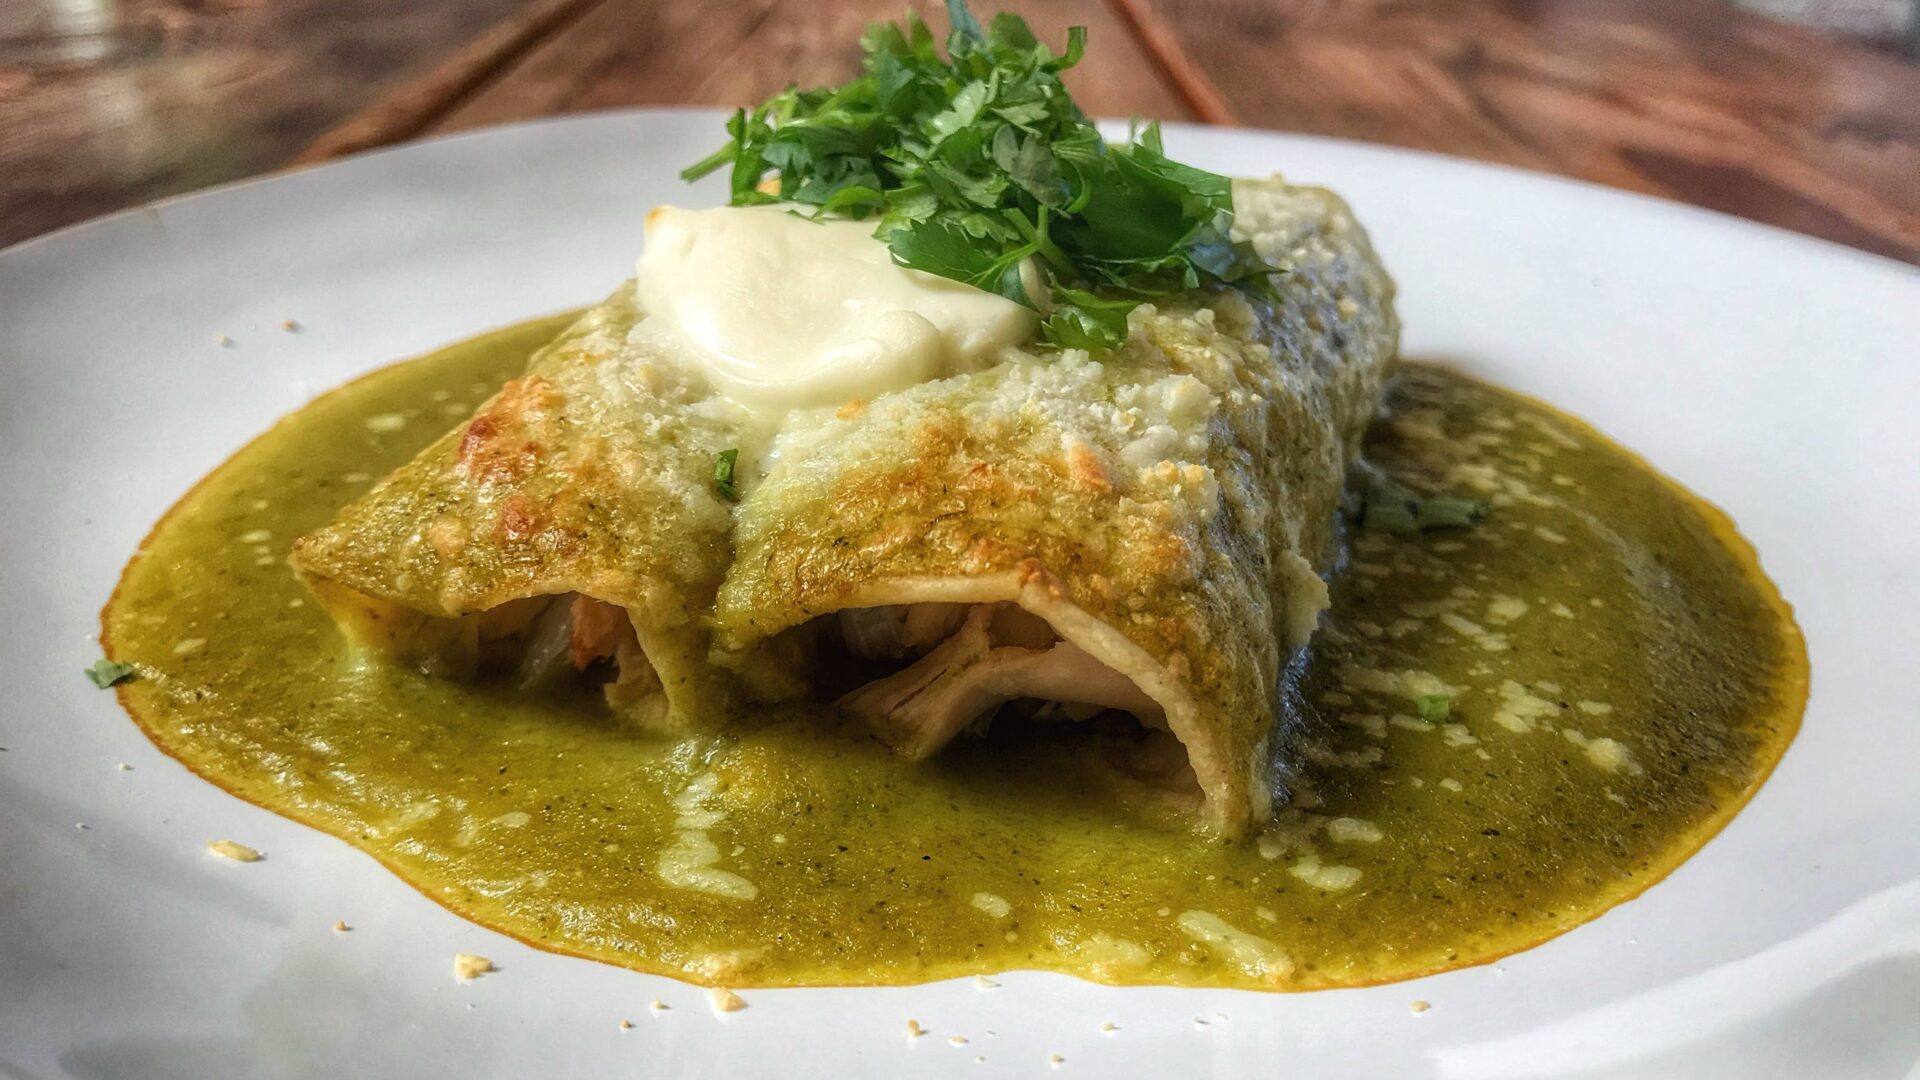 Gourmet chicken enchiladas with green sauce on a white plate.